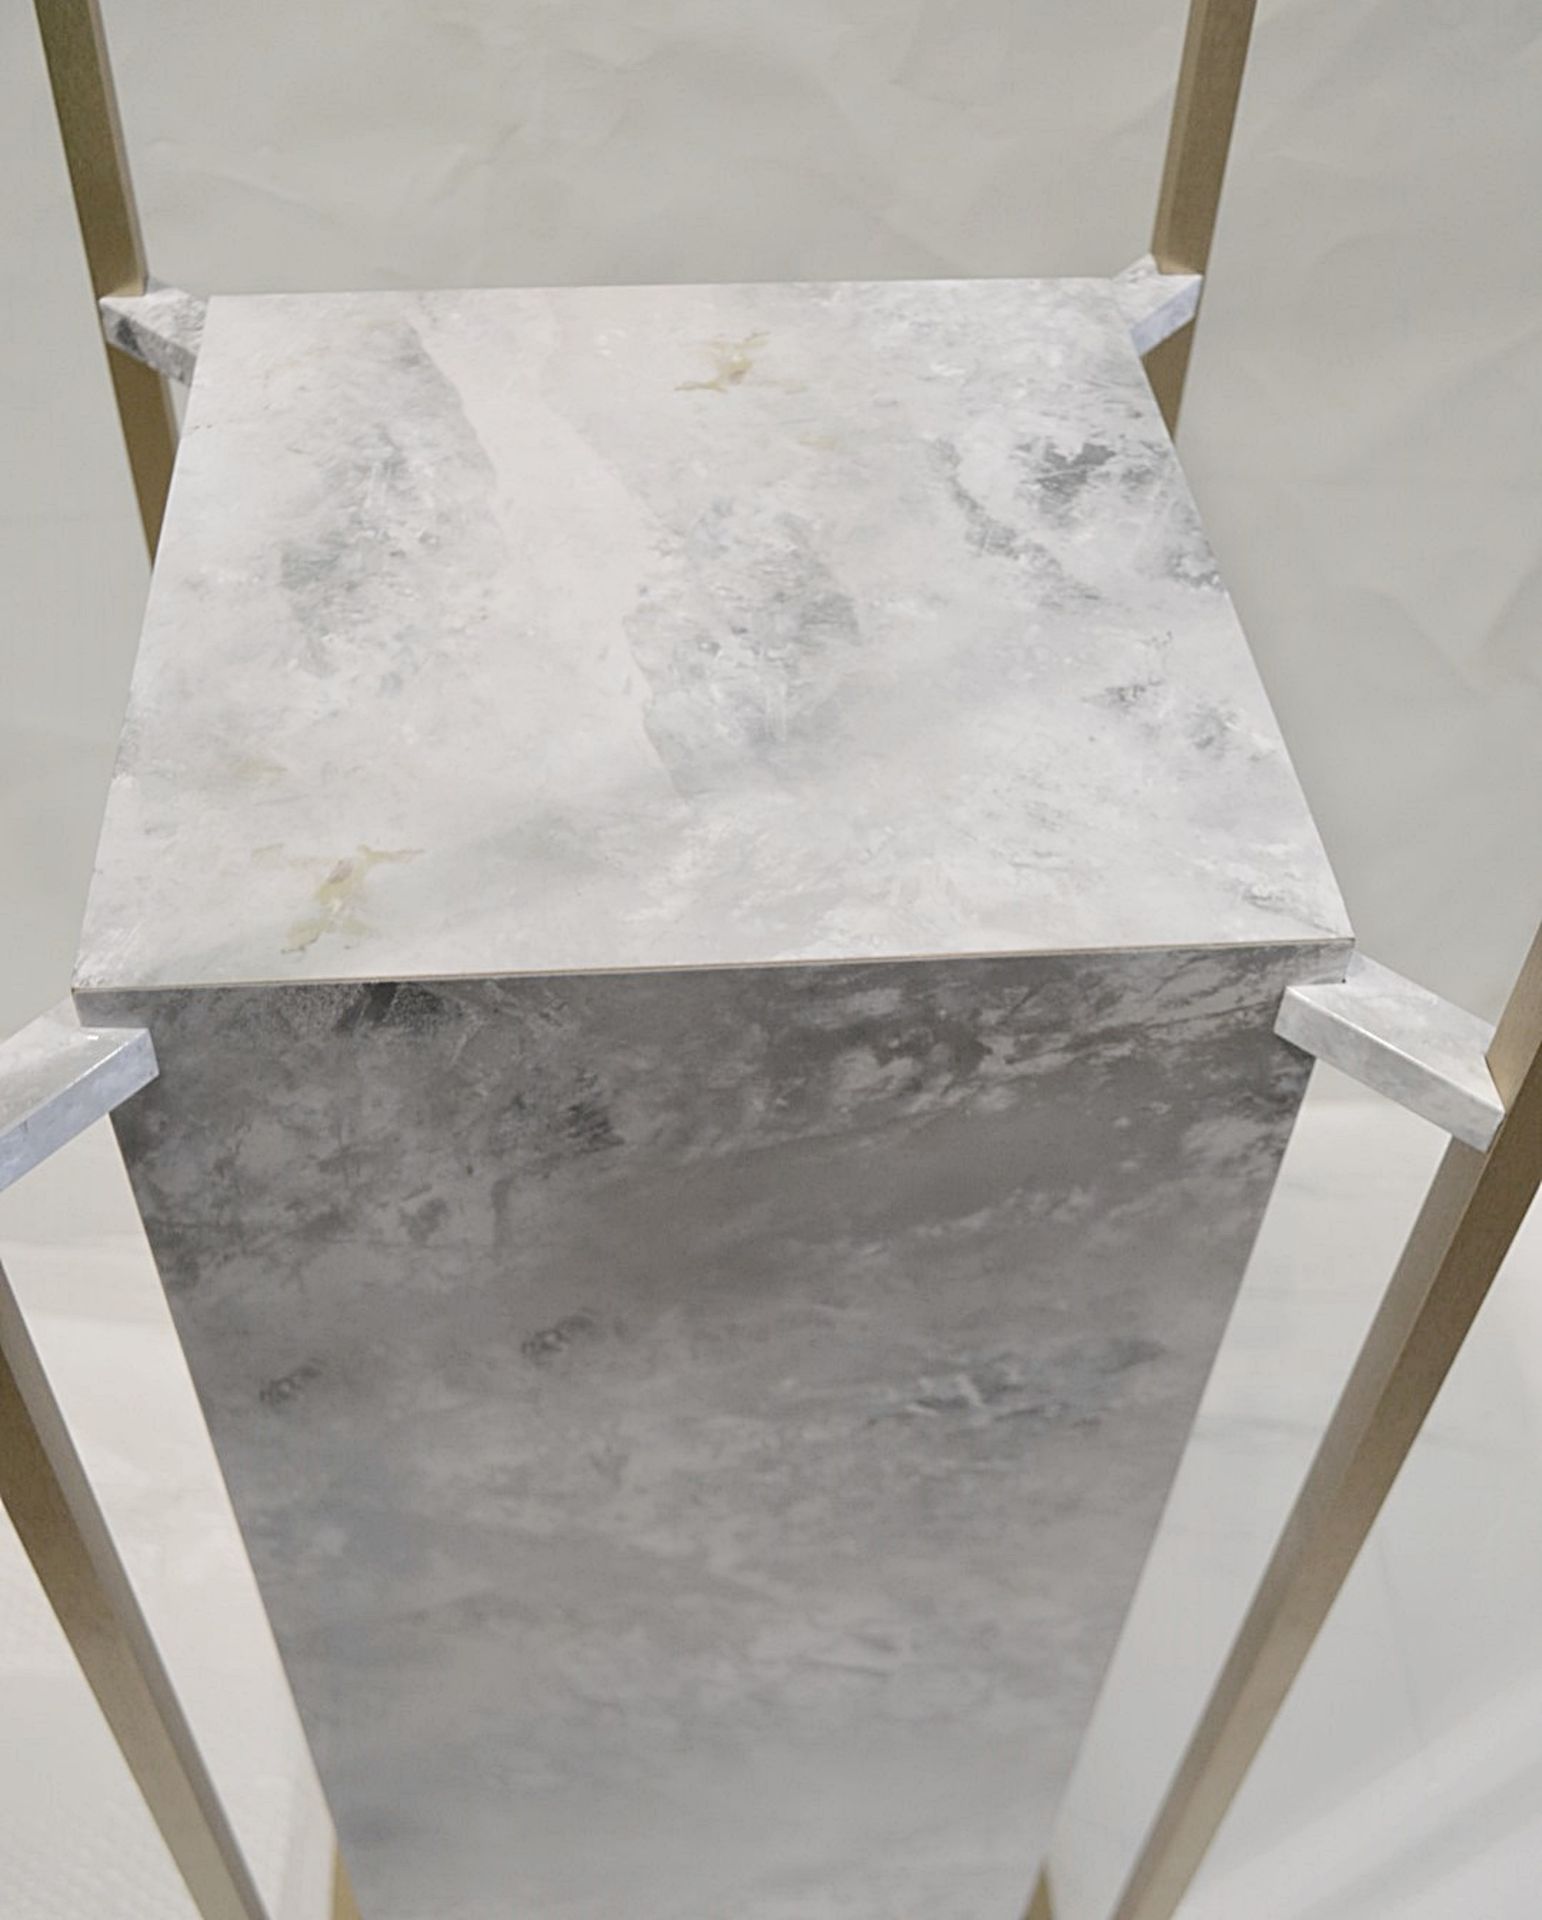 1 x 1.8 Metre Tall Freestanding Display Plinth With A Marble Effect Aestetic - Dimensions: H182 x - Image 4 of 4